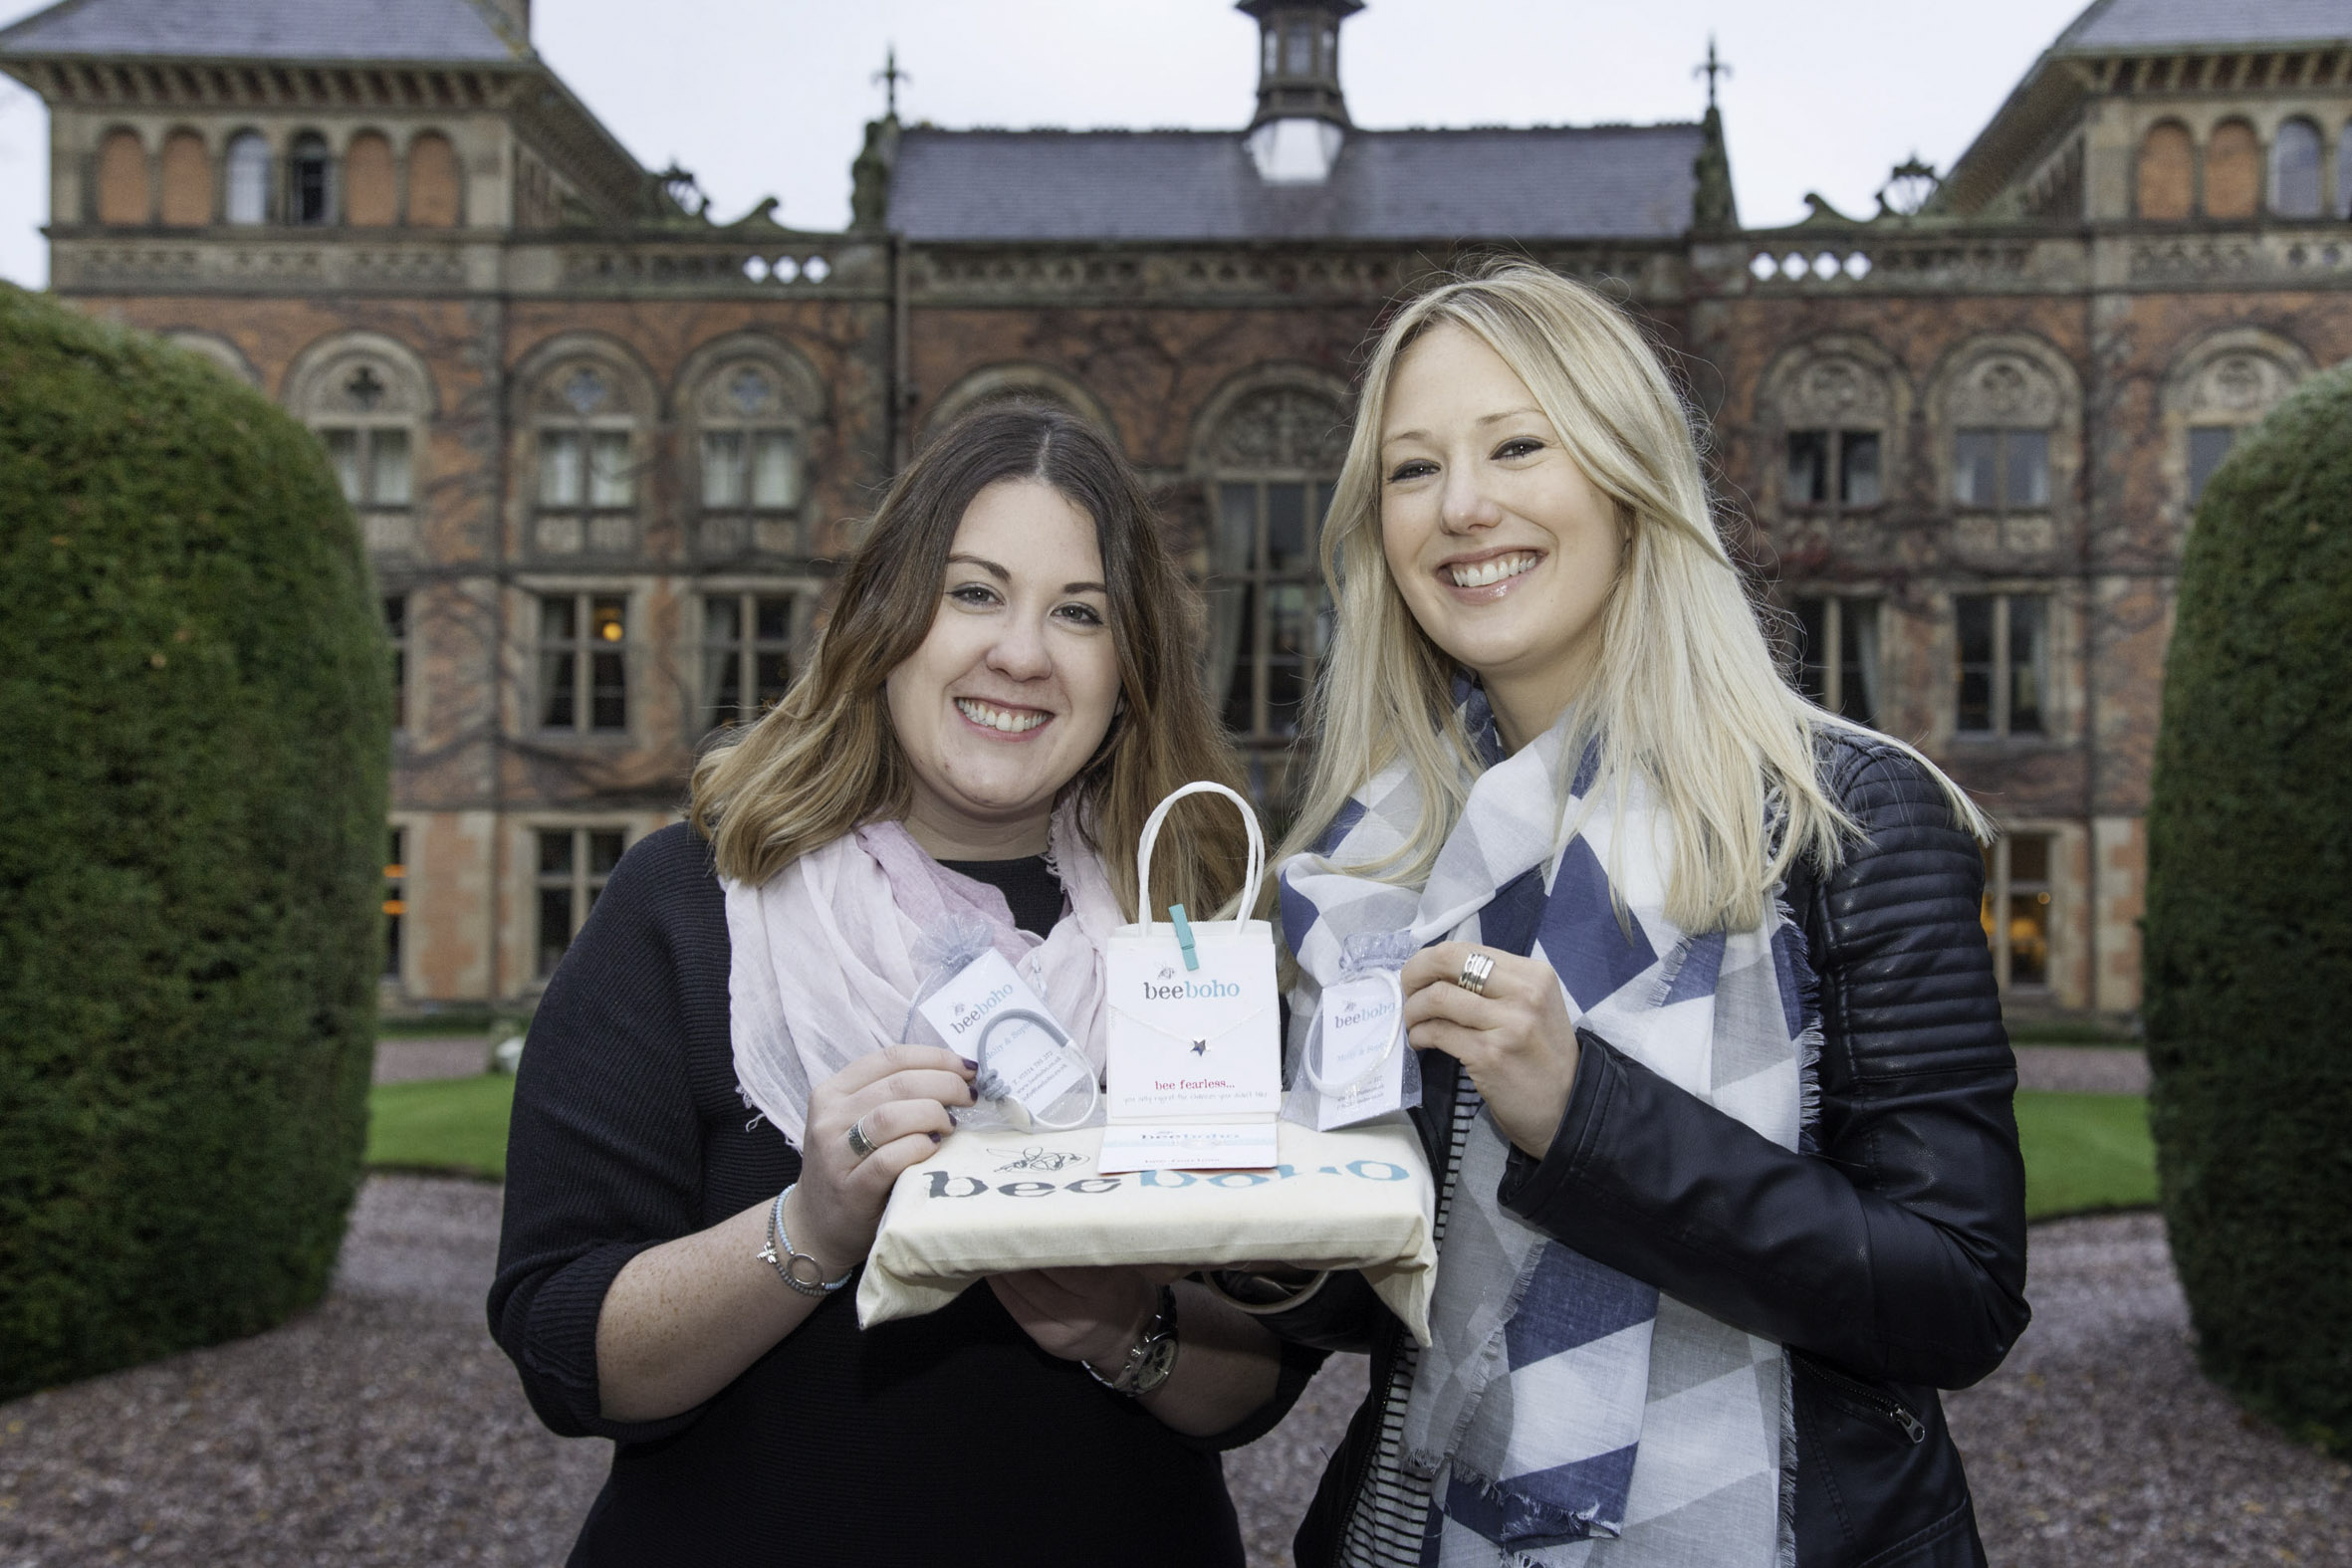 Luxury new jewellery brand to put the sparkle into Christmas at North Wales’ ‘Downton Abbey’